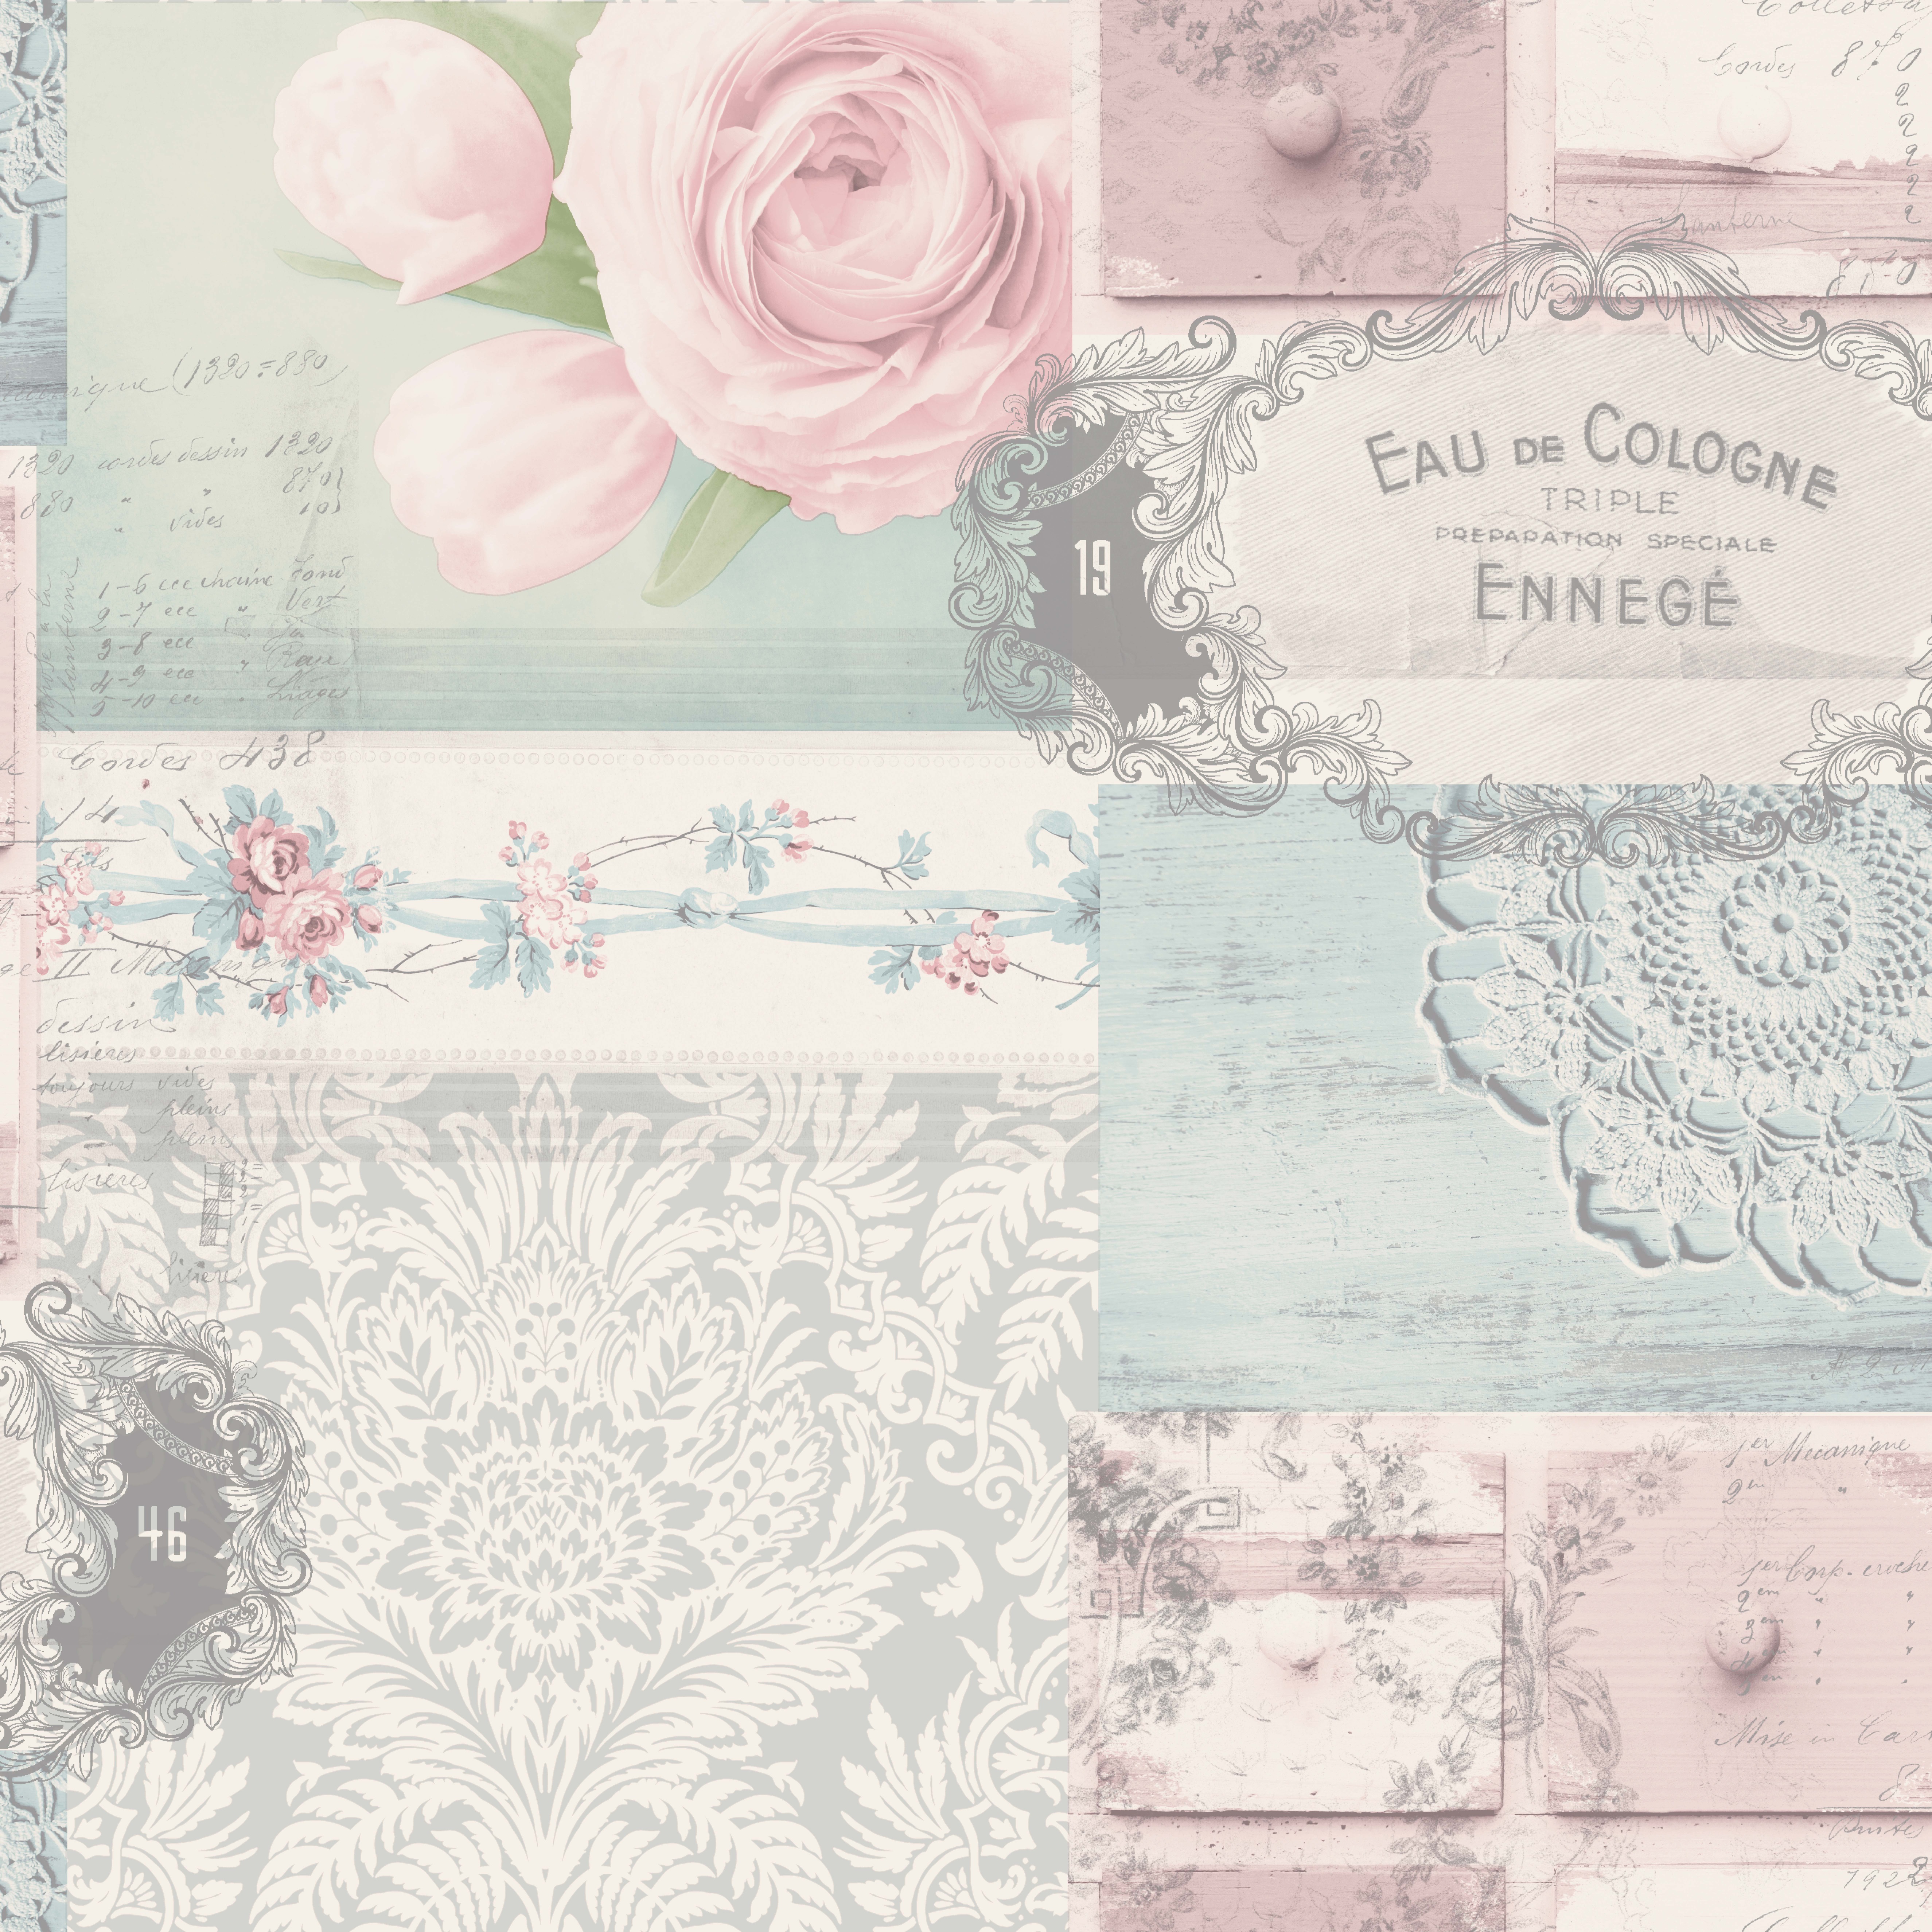 decoupage wallpaper,text,pink,paper,stationery,floral design